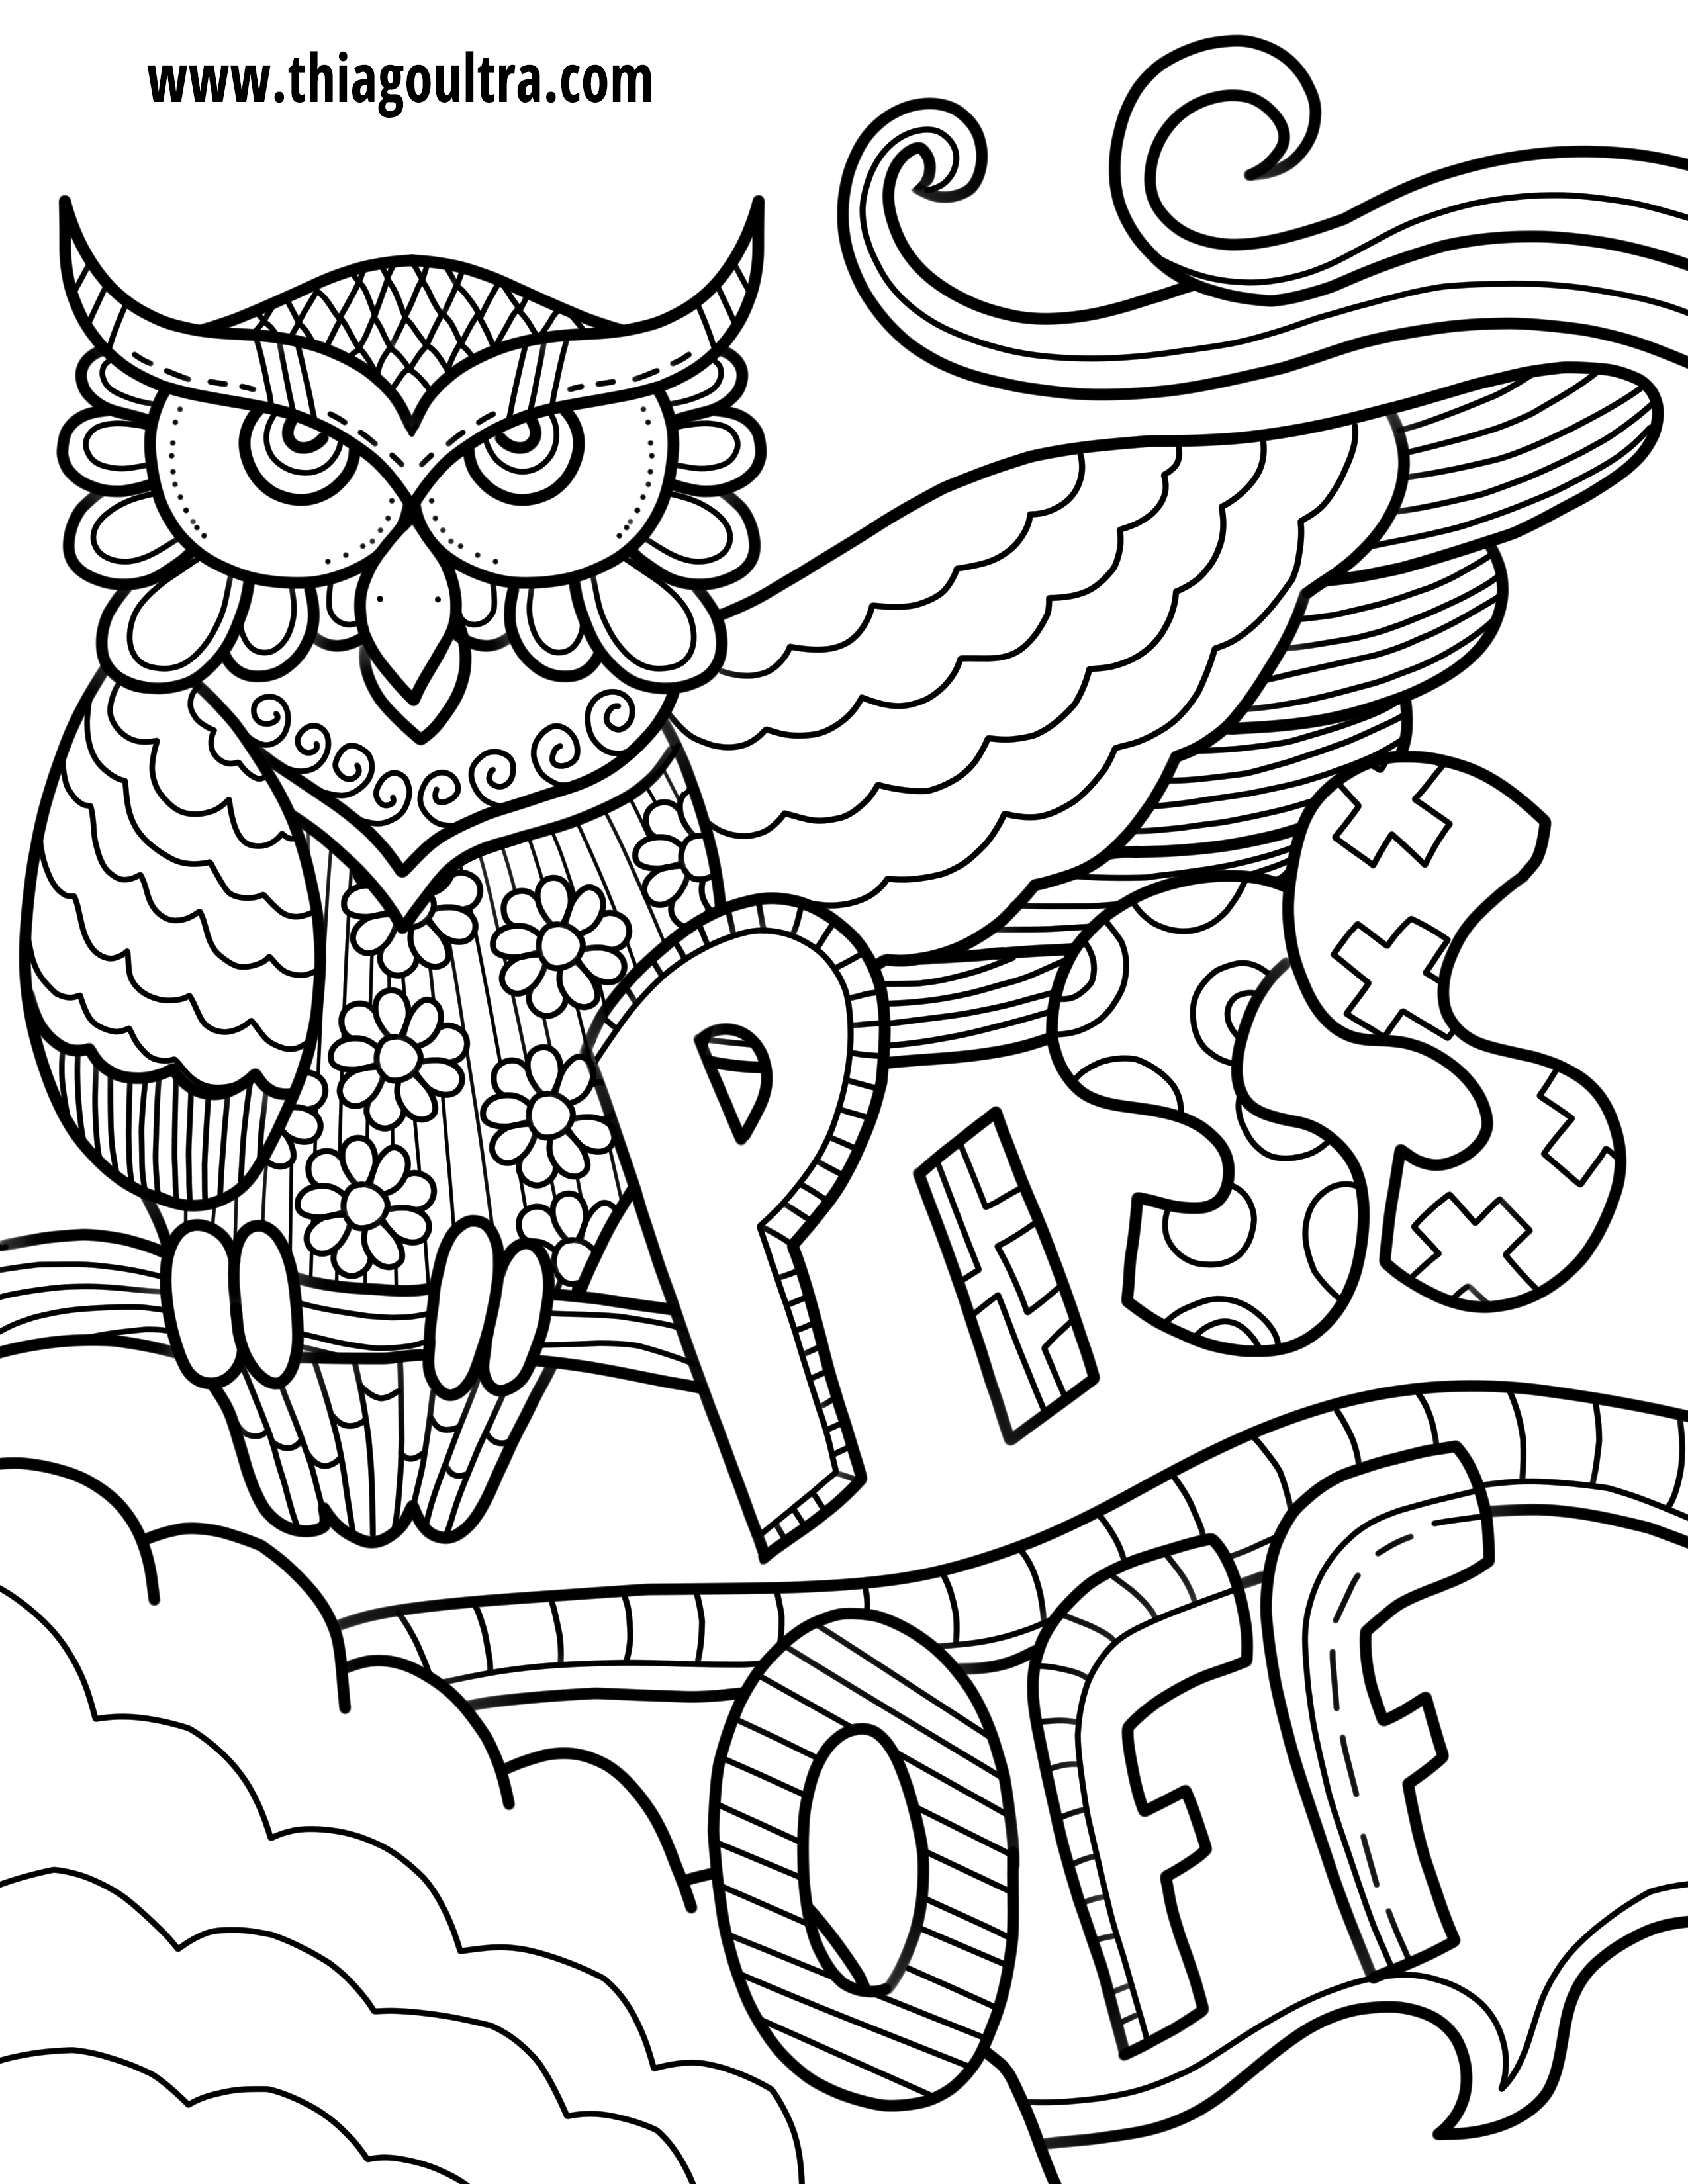 Coloring Pages : Free Coloring Pages Printable Napisy Me Reward - Swear Word Coloring Pages Printable Free